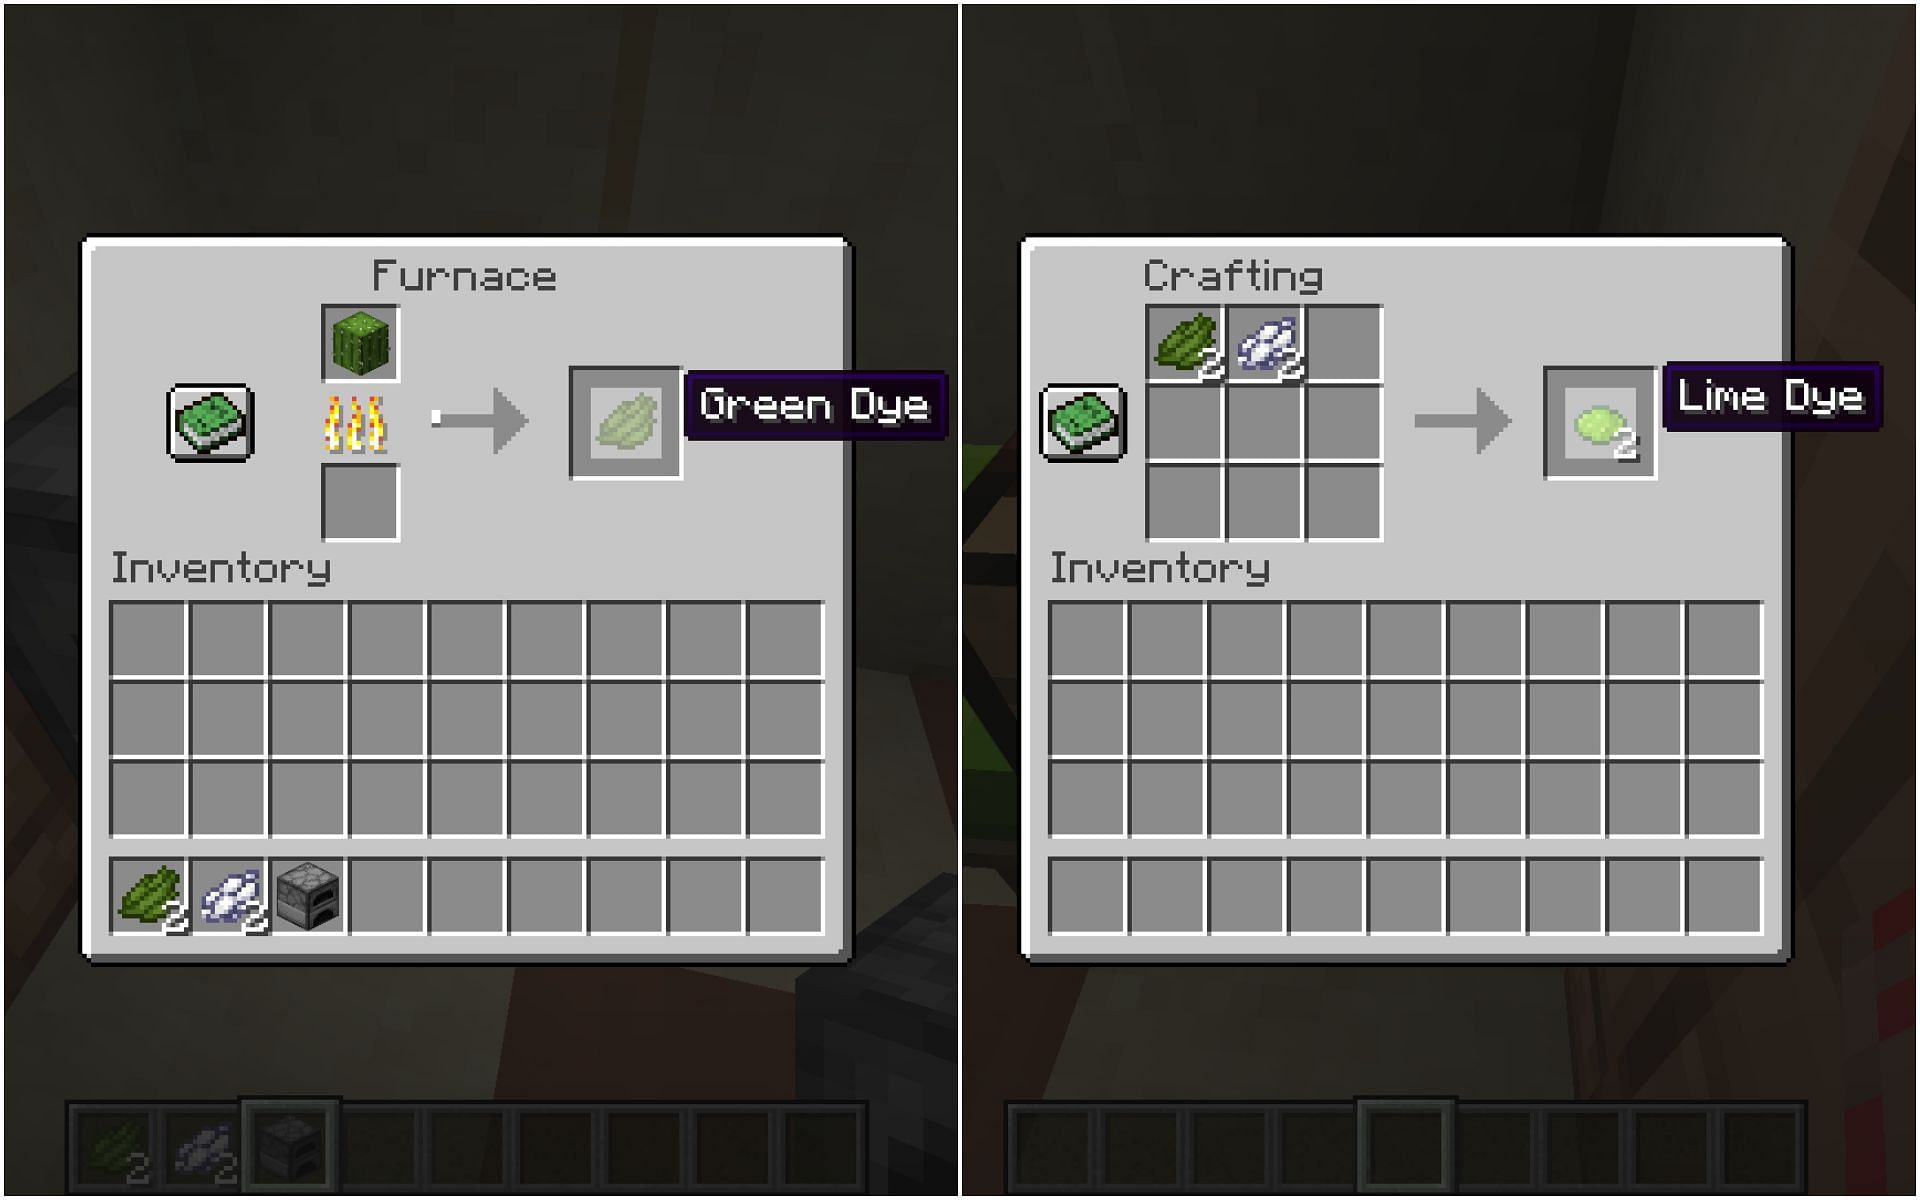 Green dye is obtained from cactus that can be combined with white dye to get lime (Image via Minecraft 1.19)